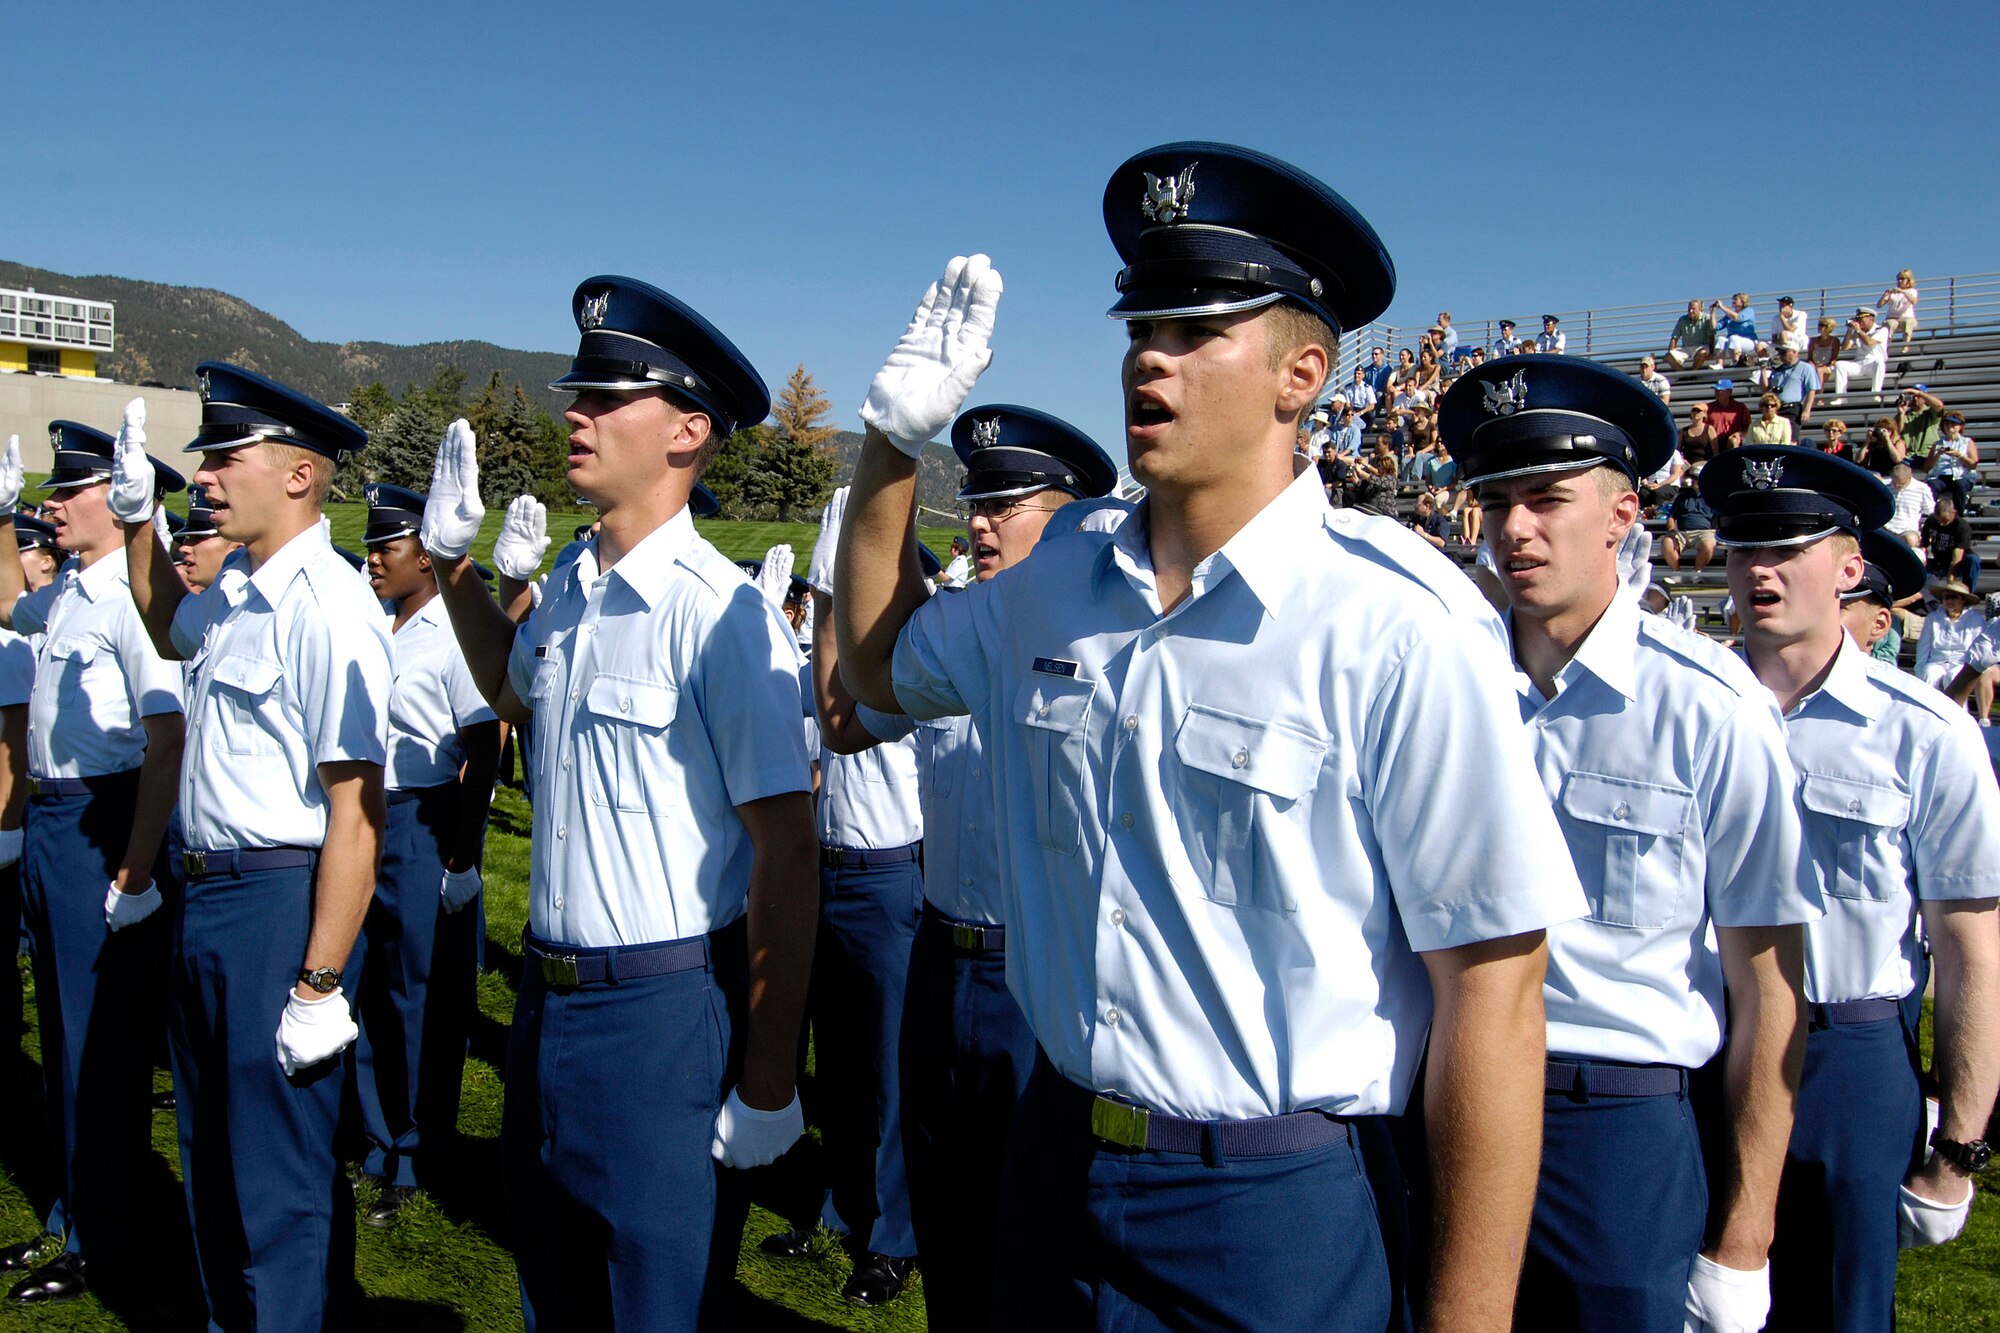 U.S. Air Force Academy Basic Cadet Mark Nelsen leads fellow trainees in reciting the honor oath Aug. 6 during Acceptance Parade events on the Stillman Parade Field at the U.S. Air Force Academy in Colorado. (U.S Air Force Photo/Mike Kaplan)
